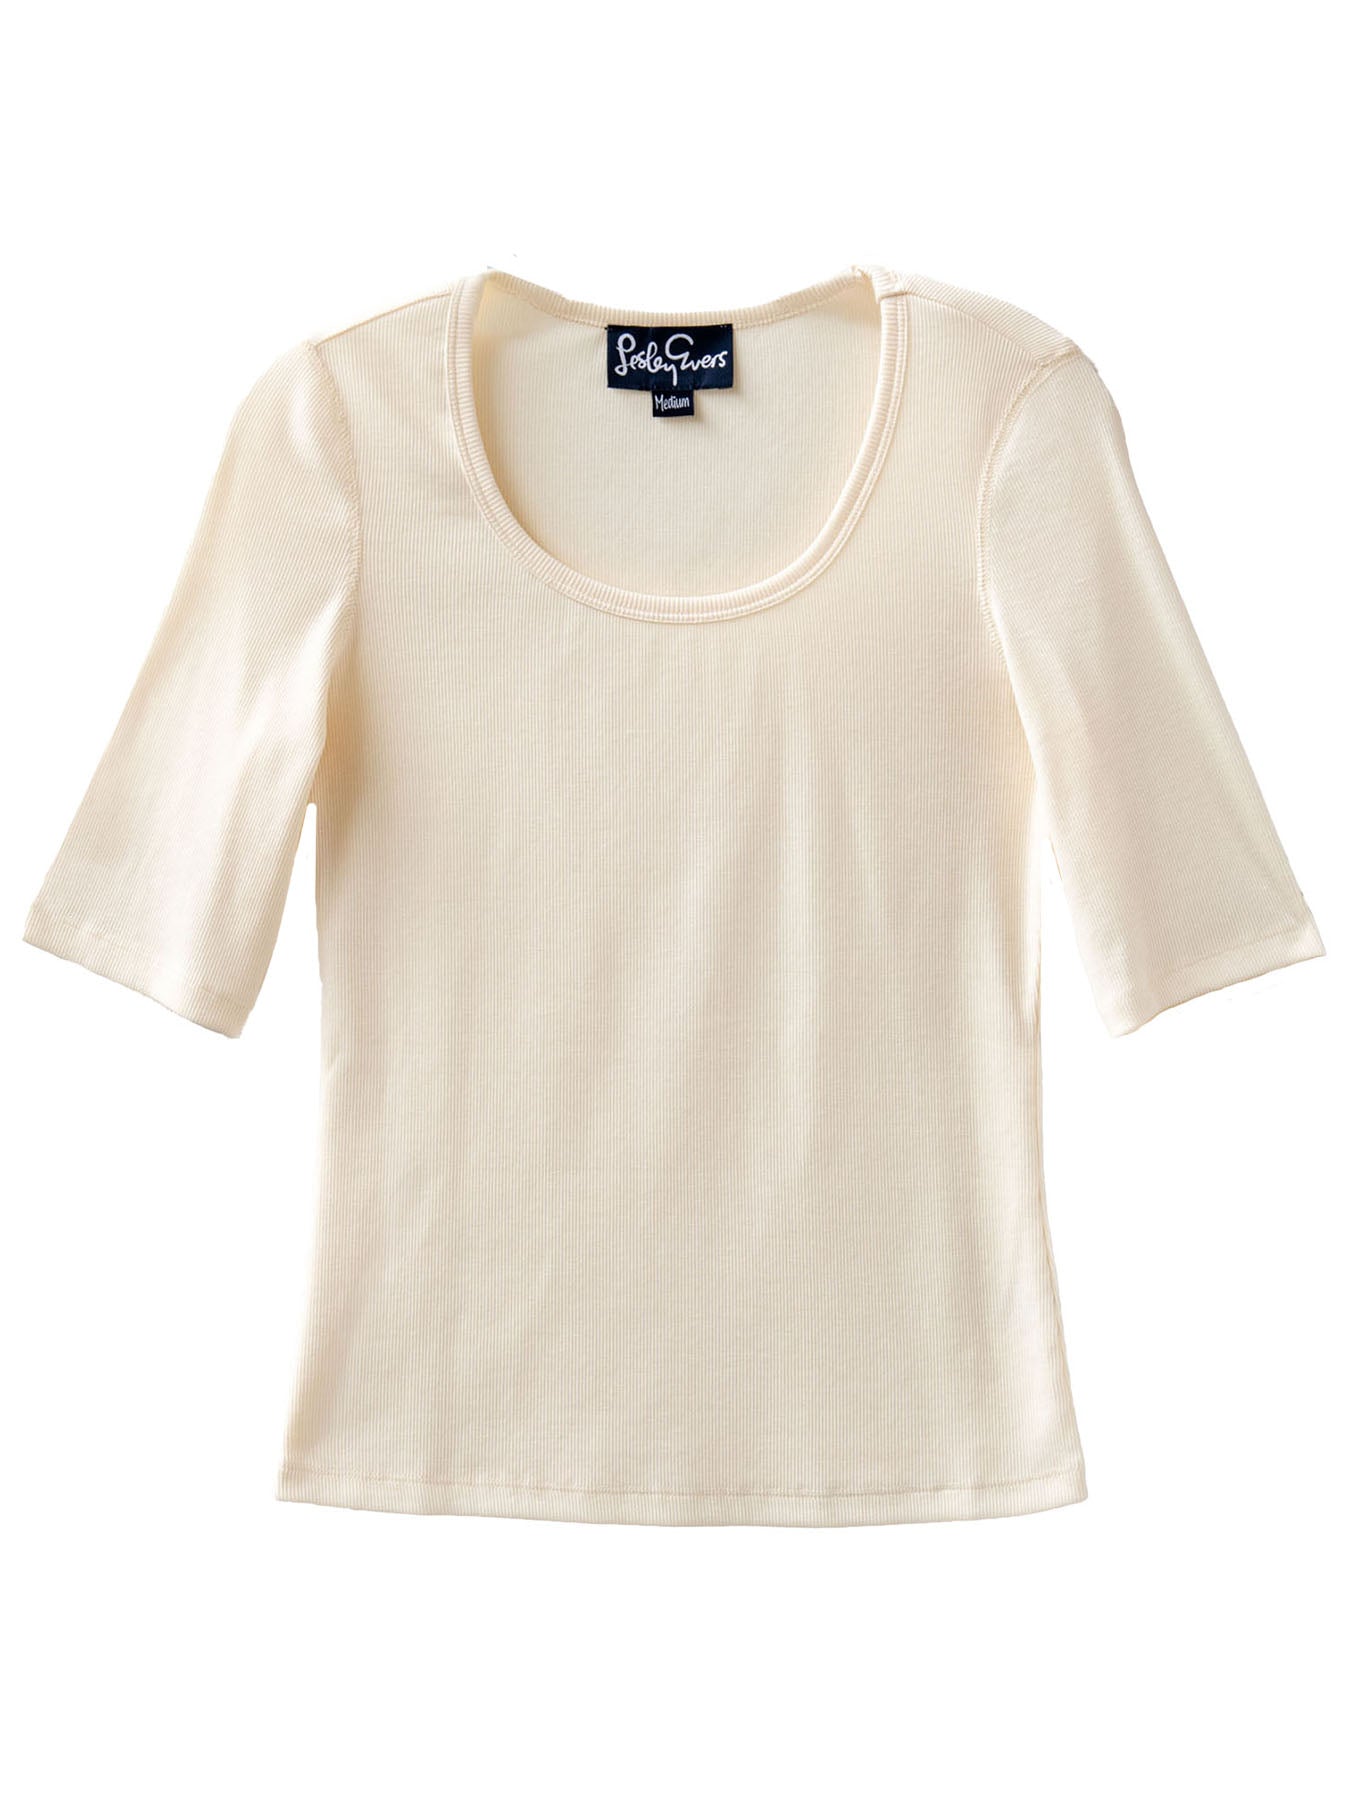 MALLORY rib tee Ivory - Lesley Evers-Best Seller-Shop-Shop/All Products